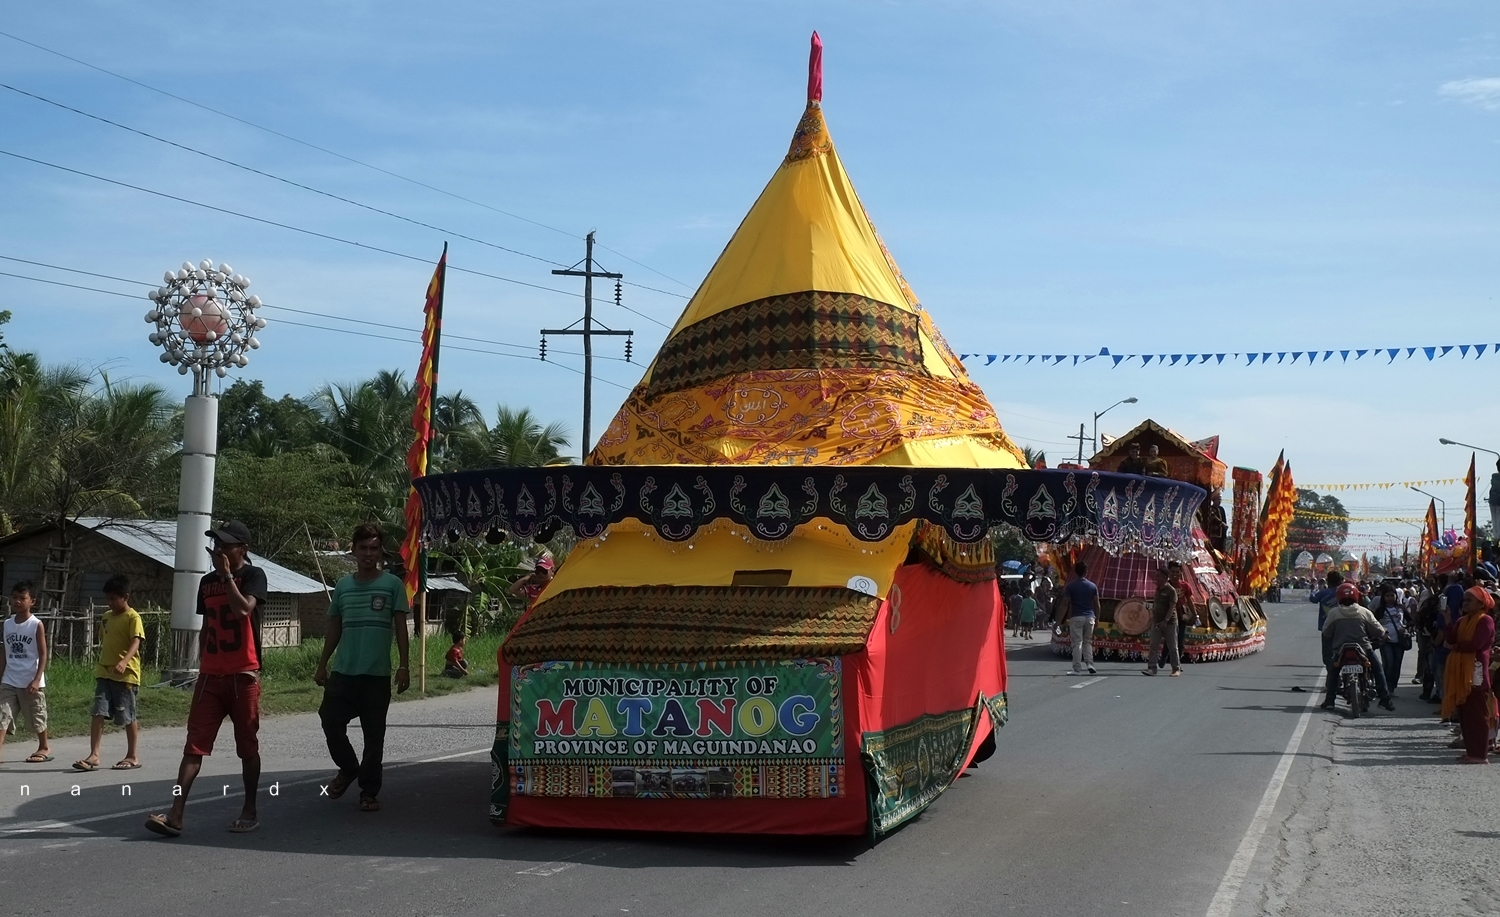 Inaul Festival Float Parade, An Amazing Display of Artistry and Culture